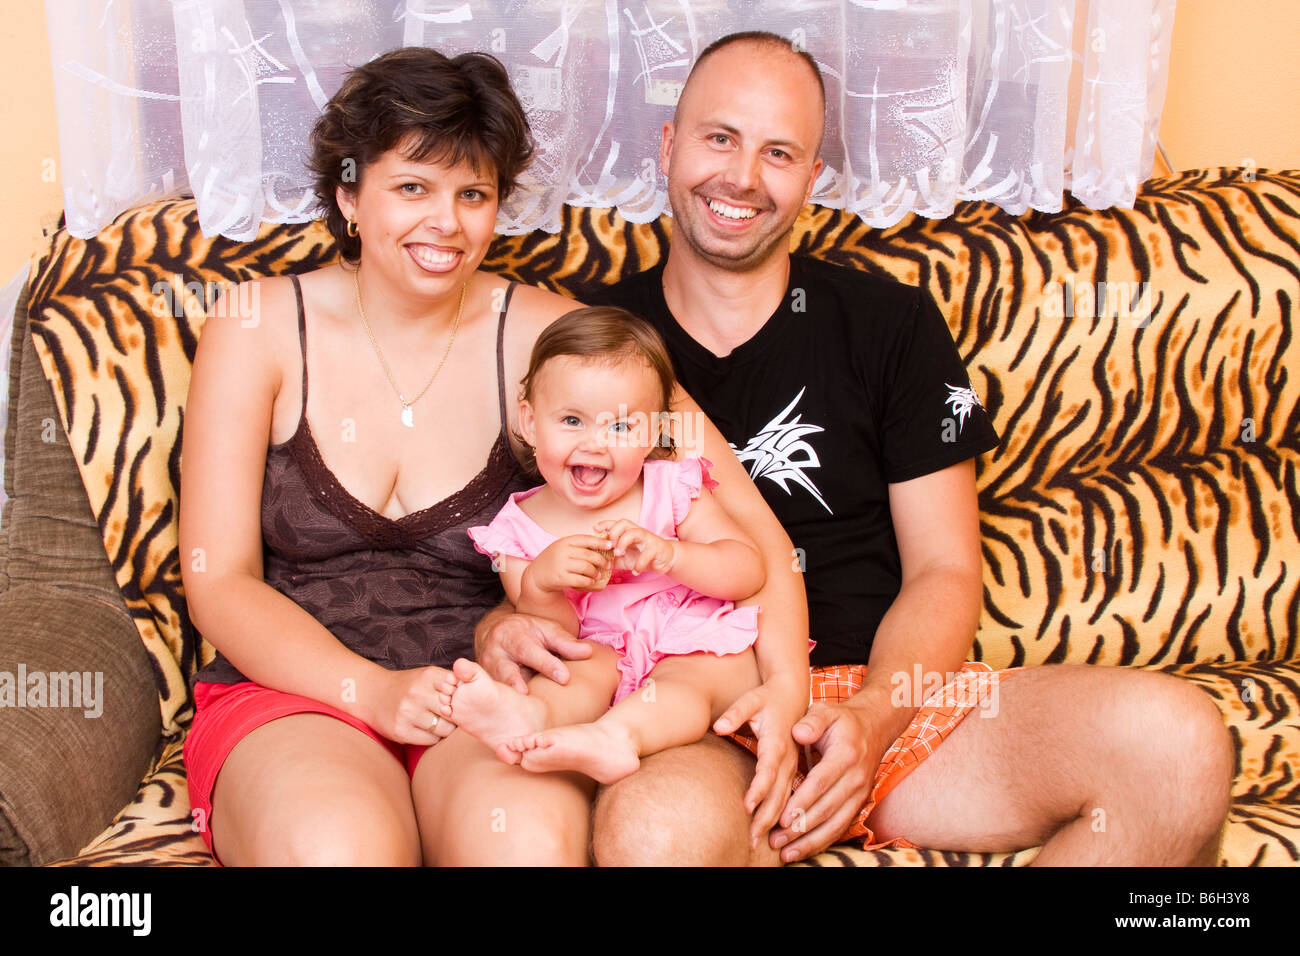 Smiling happy family man 32 years old with his daughter 16 months old and his woman 29 years old Stock Photo